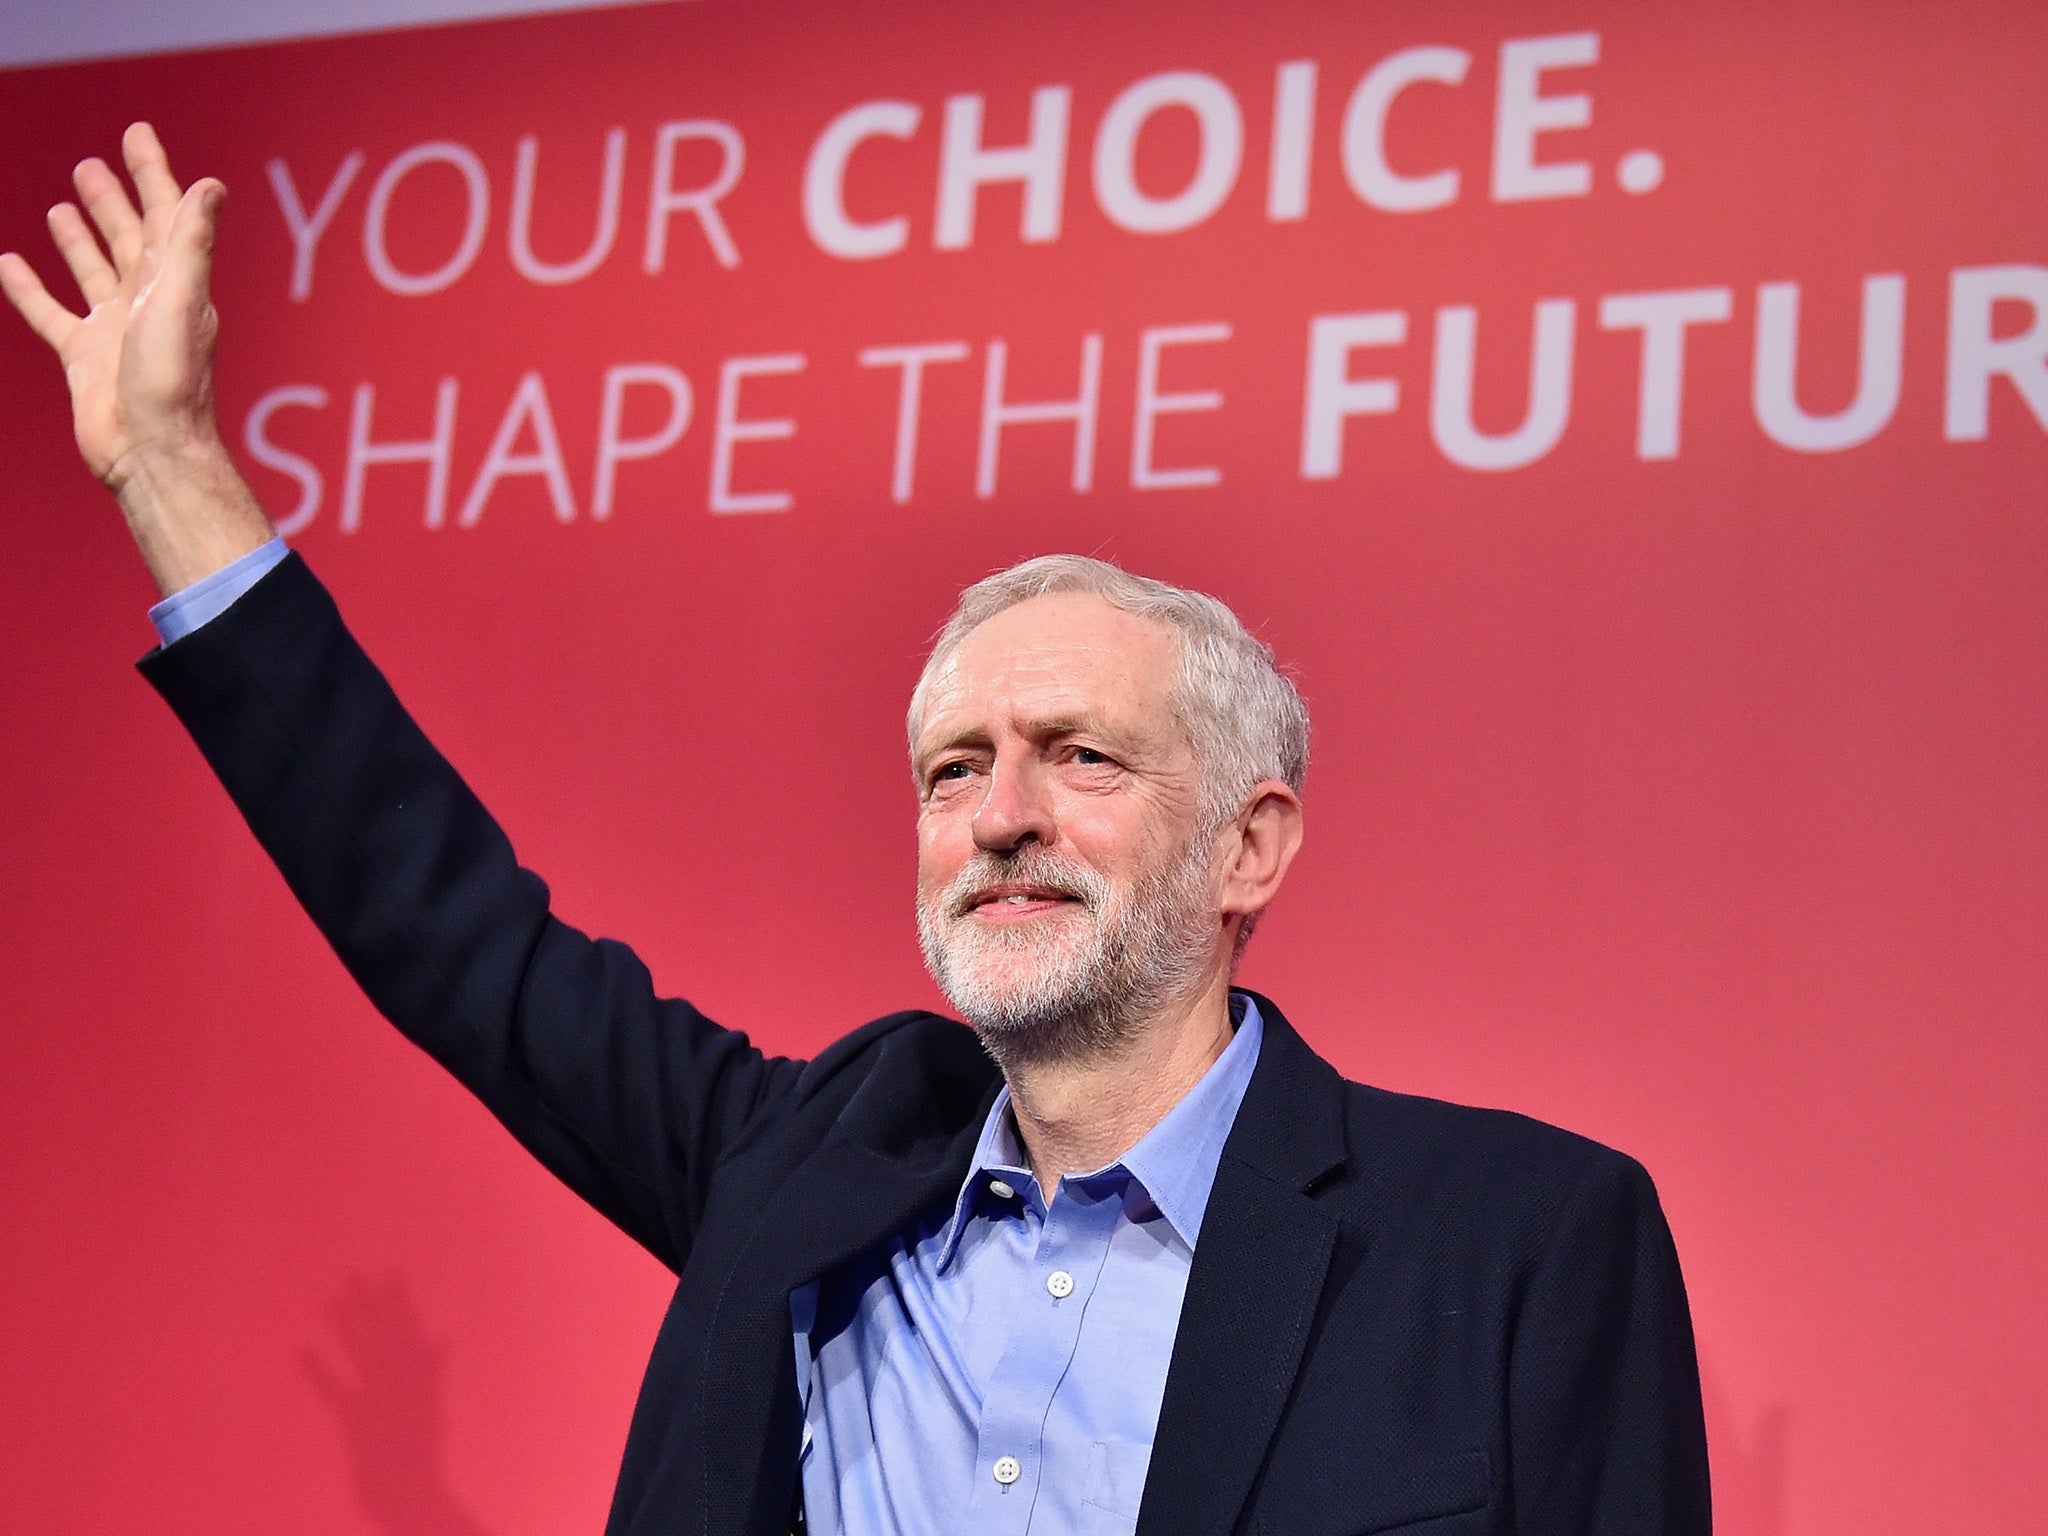 Jeremy Corbyn says he will offer the ‘hand of friendship’ to MPs who have quit the Labour frontbench but insists the PLP must respect the result of the leadership election